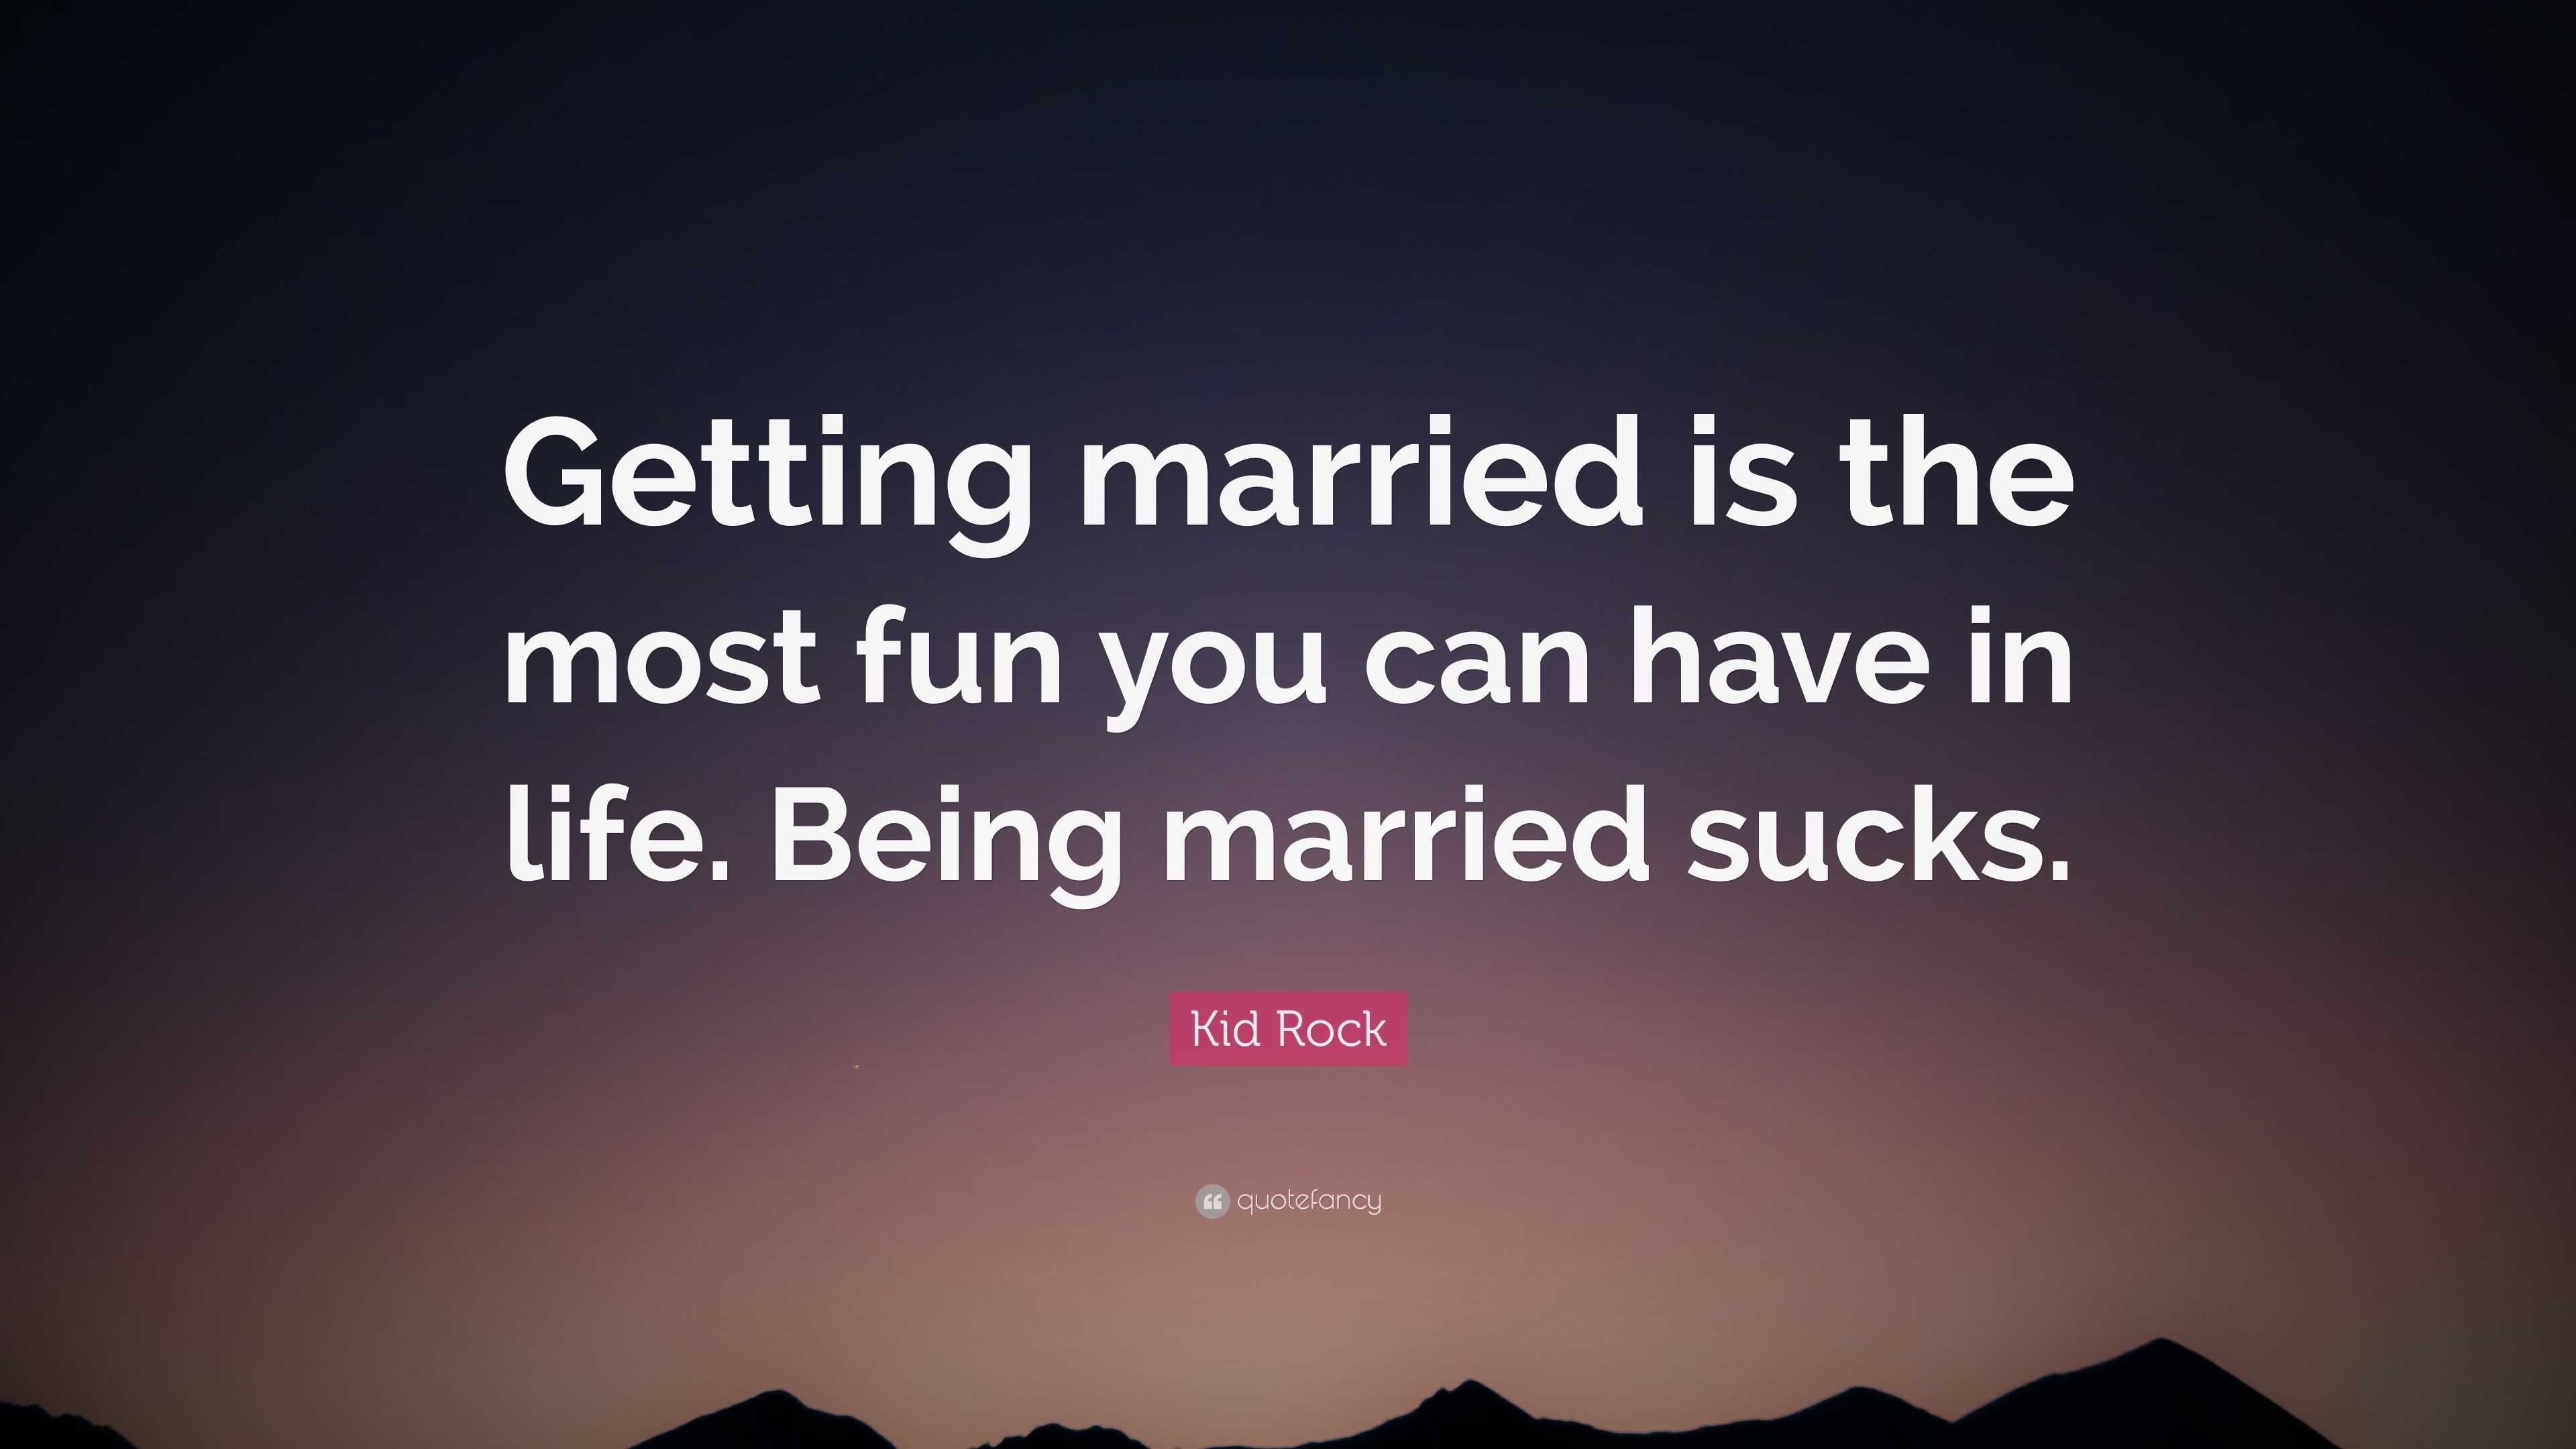 Kid Rock Quote “Getting married is the picture